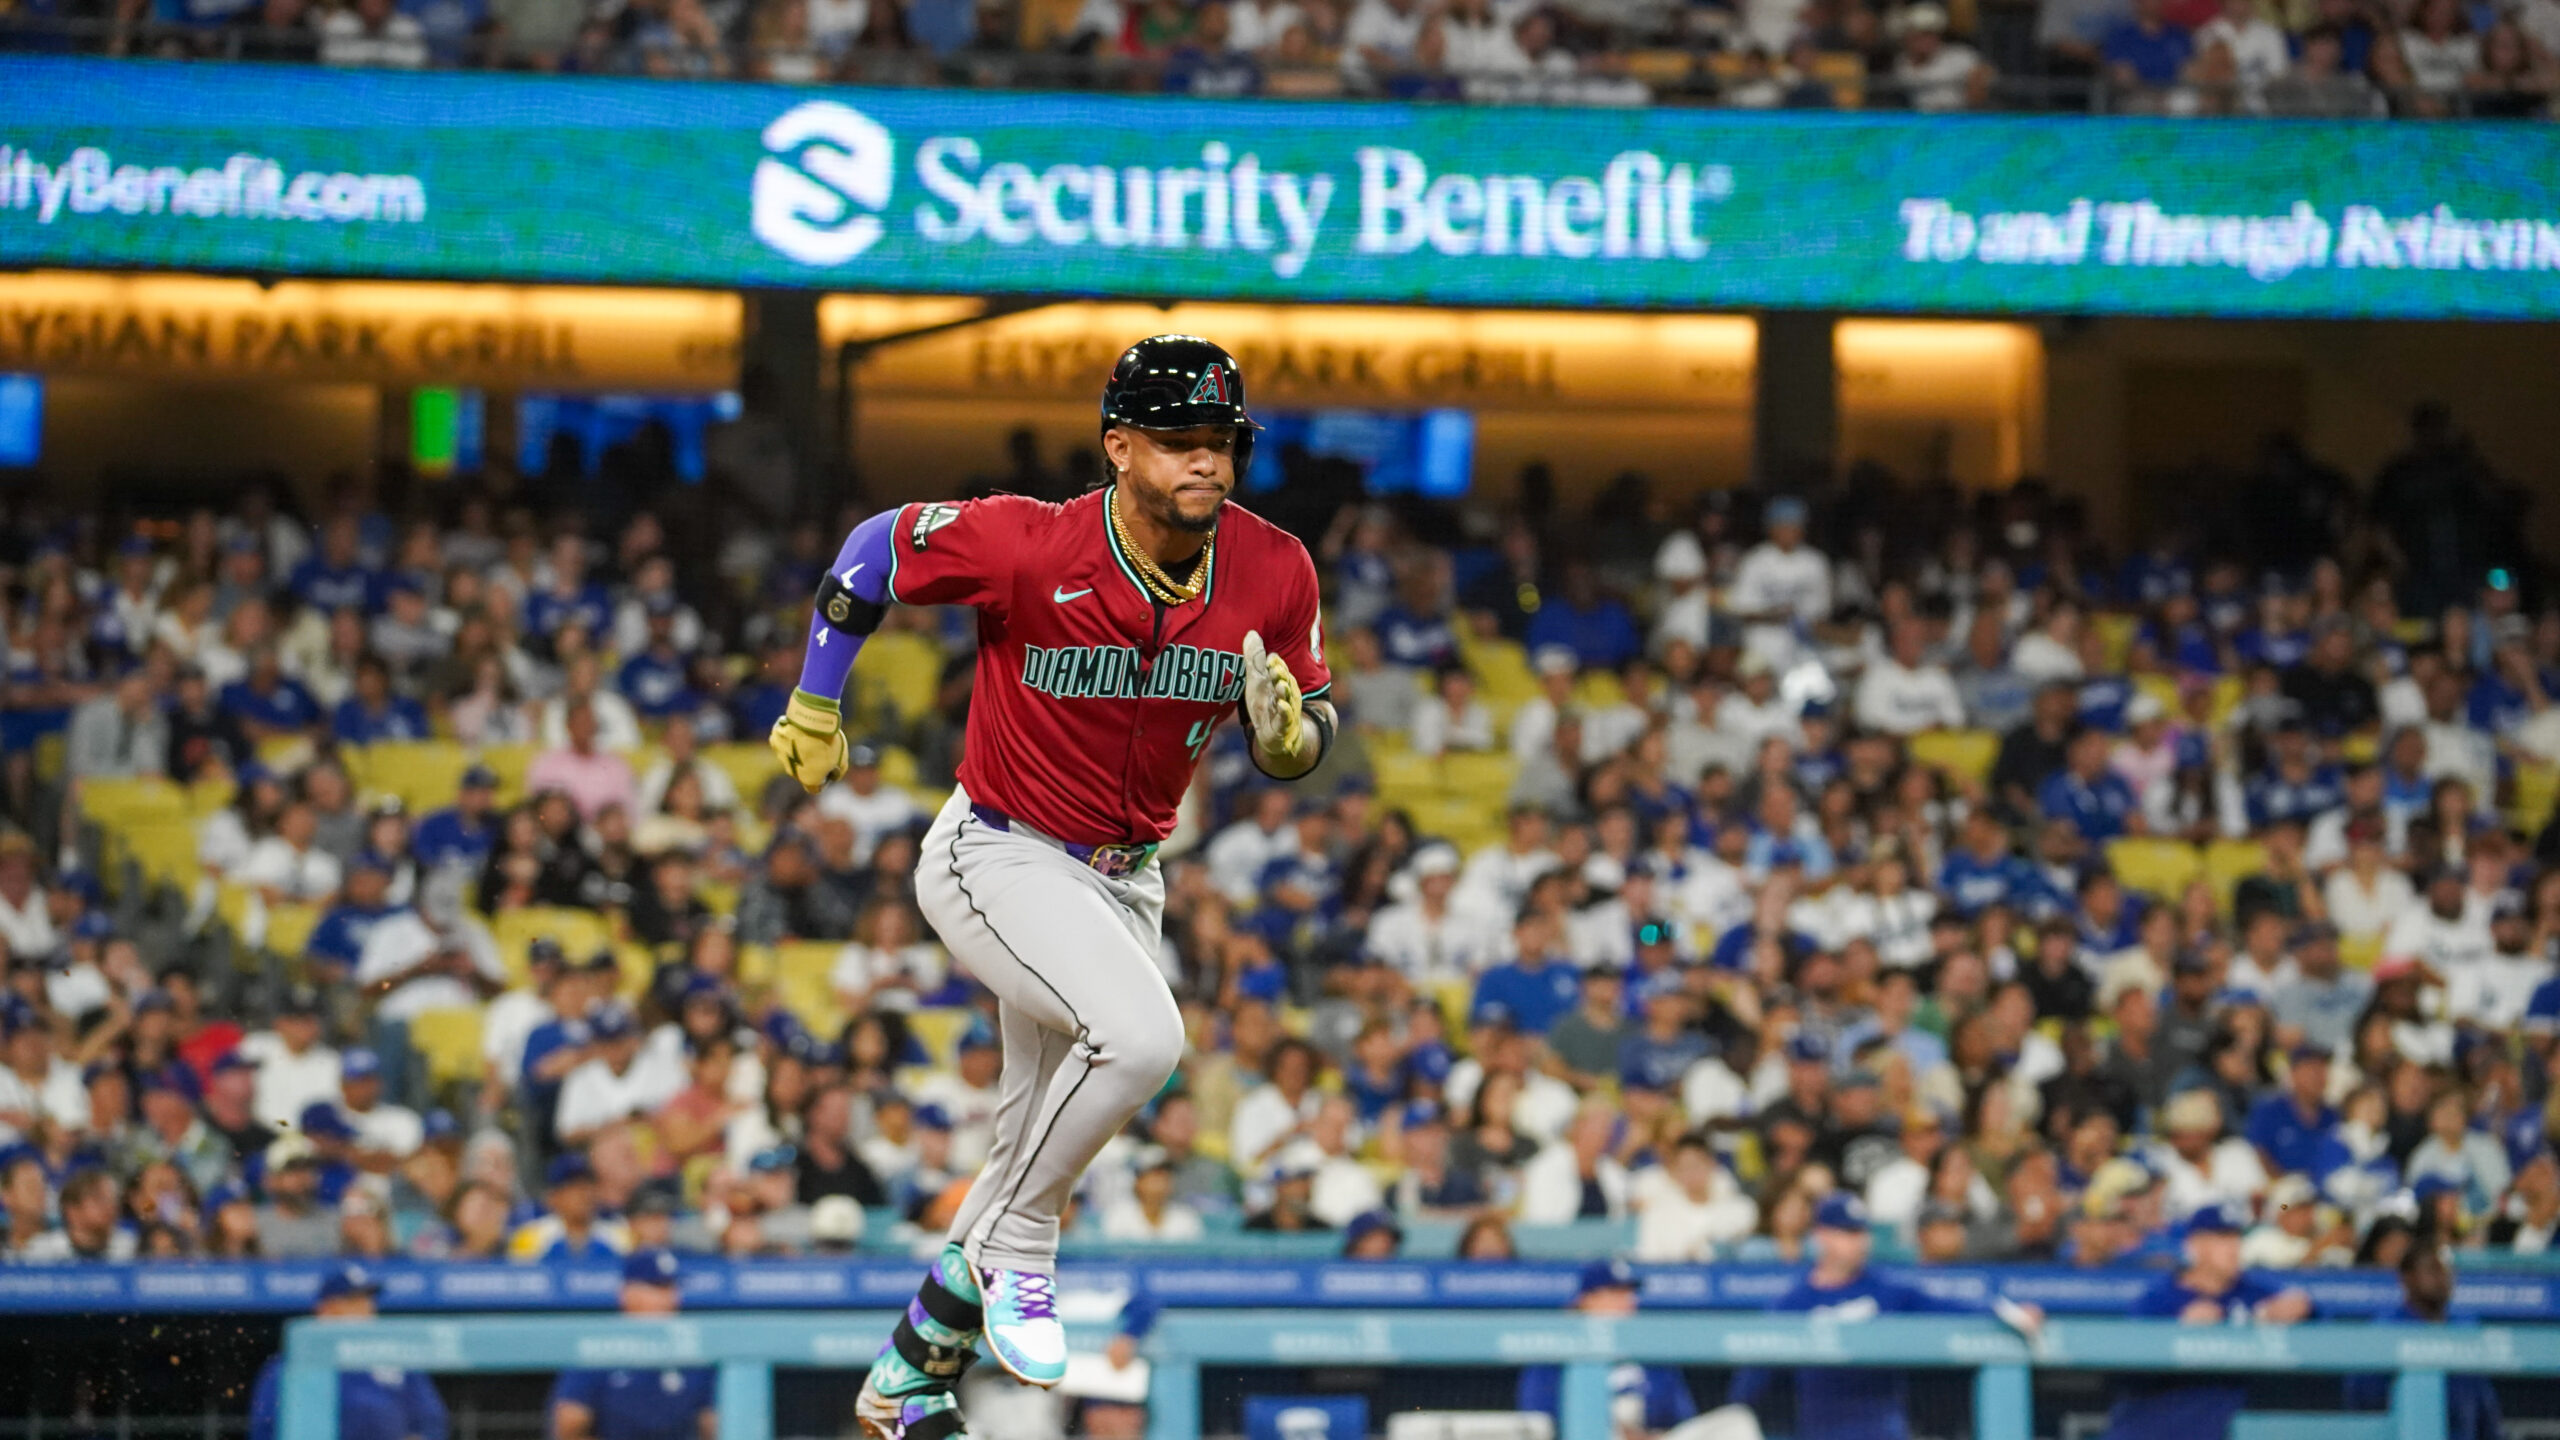 Ketel Marte sidelined as D-backs face Padres, Newman to step in